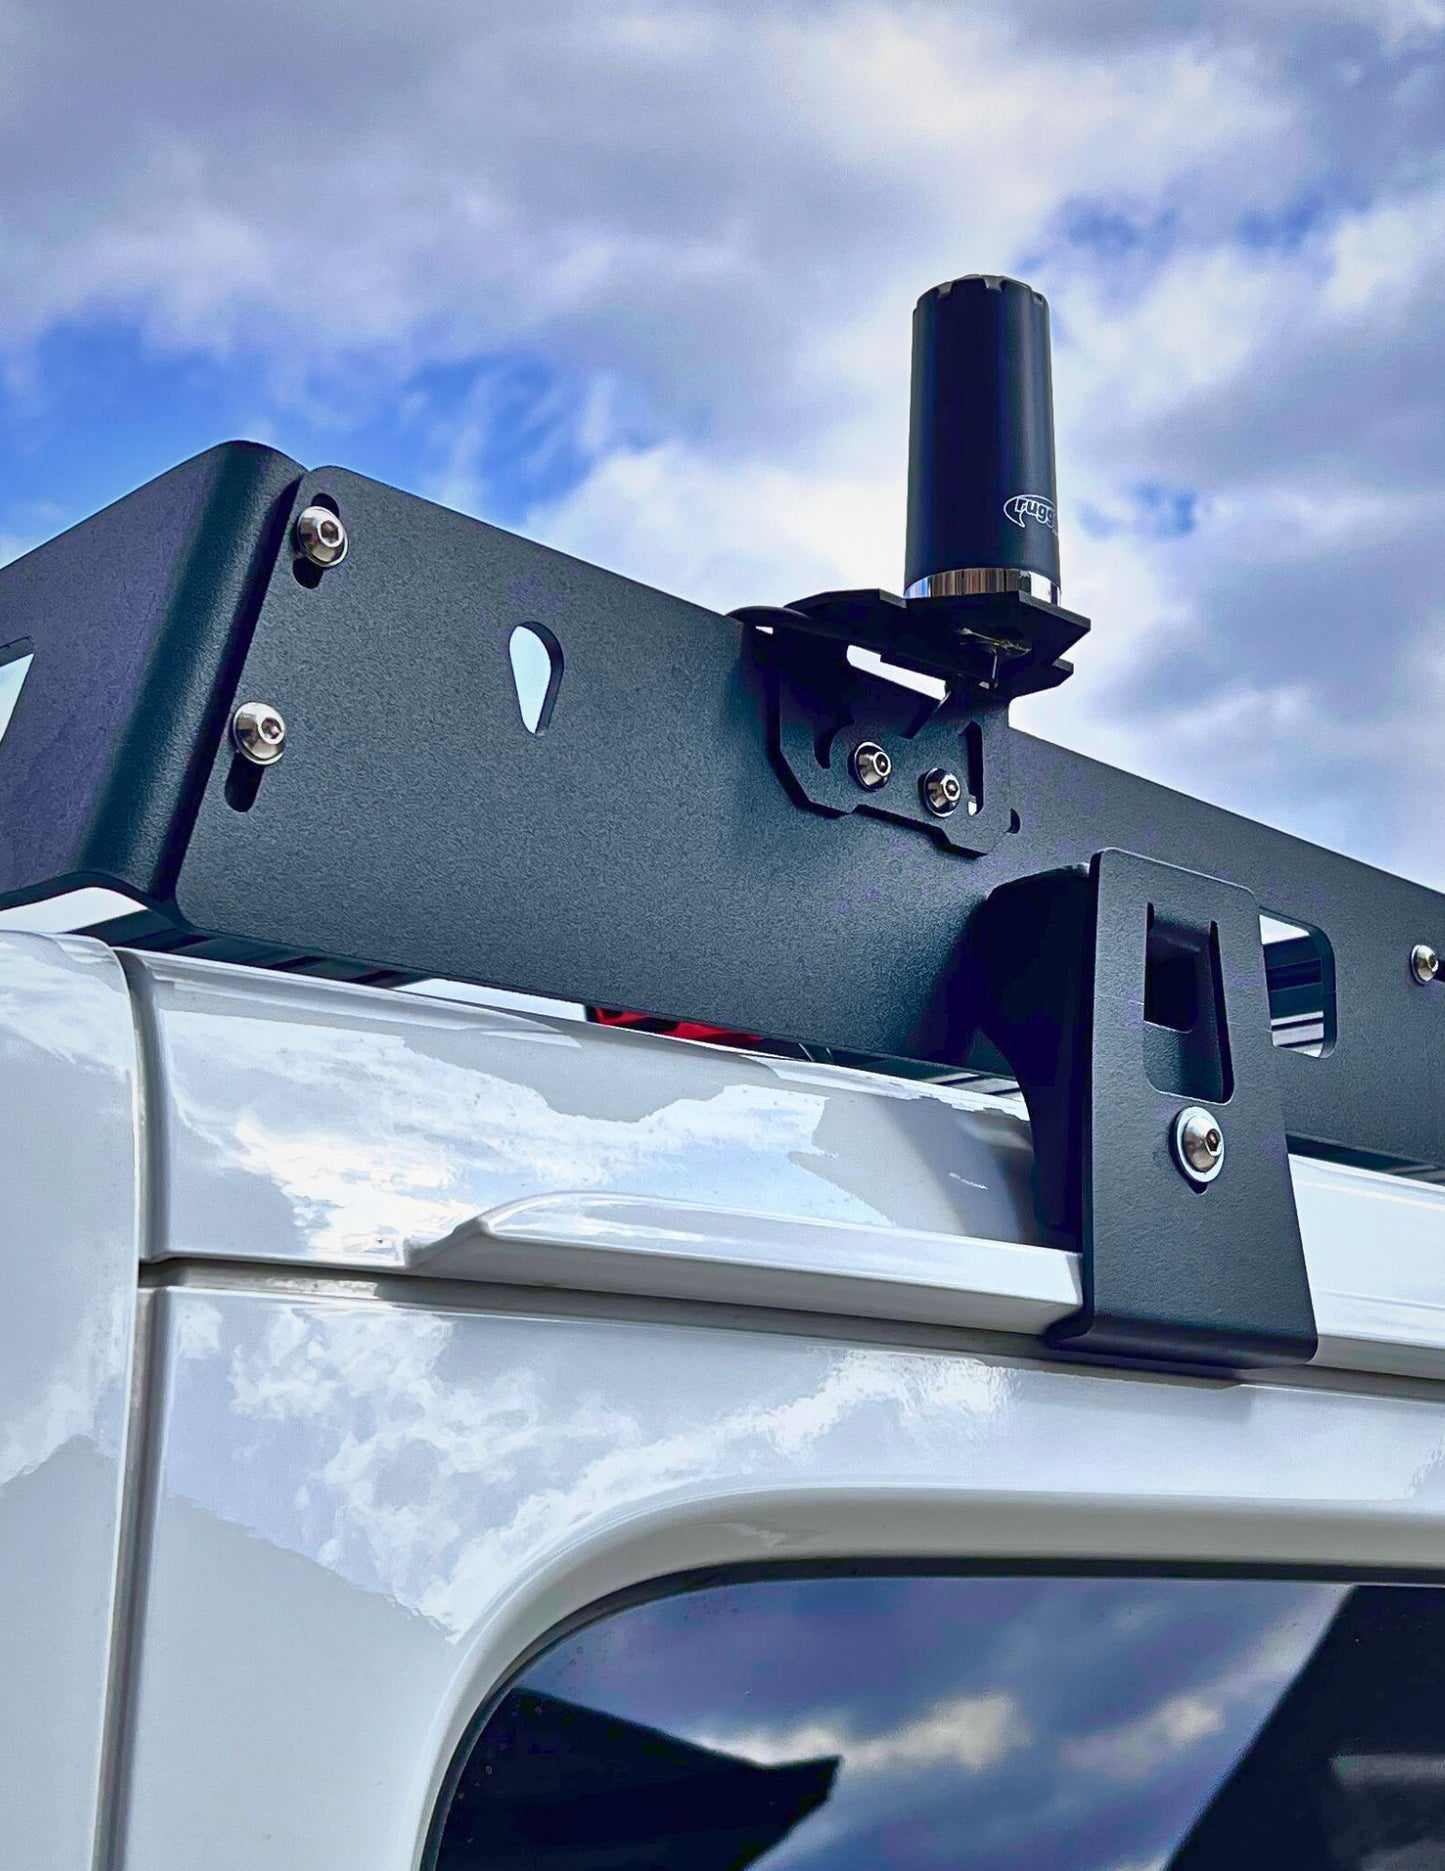 Roof Rack NMO Antenna Mount For GMRS / HAM Radios - 3/4" or 3/8" 90 Degree